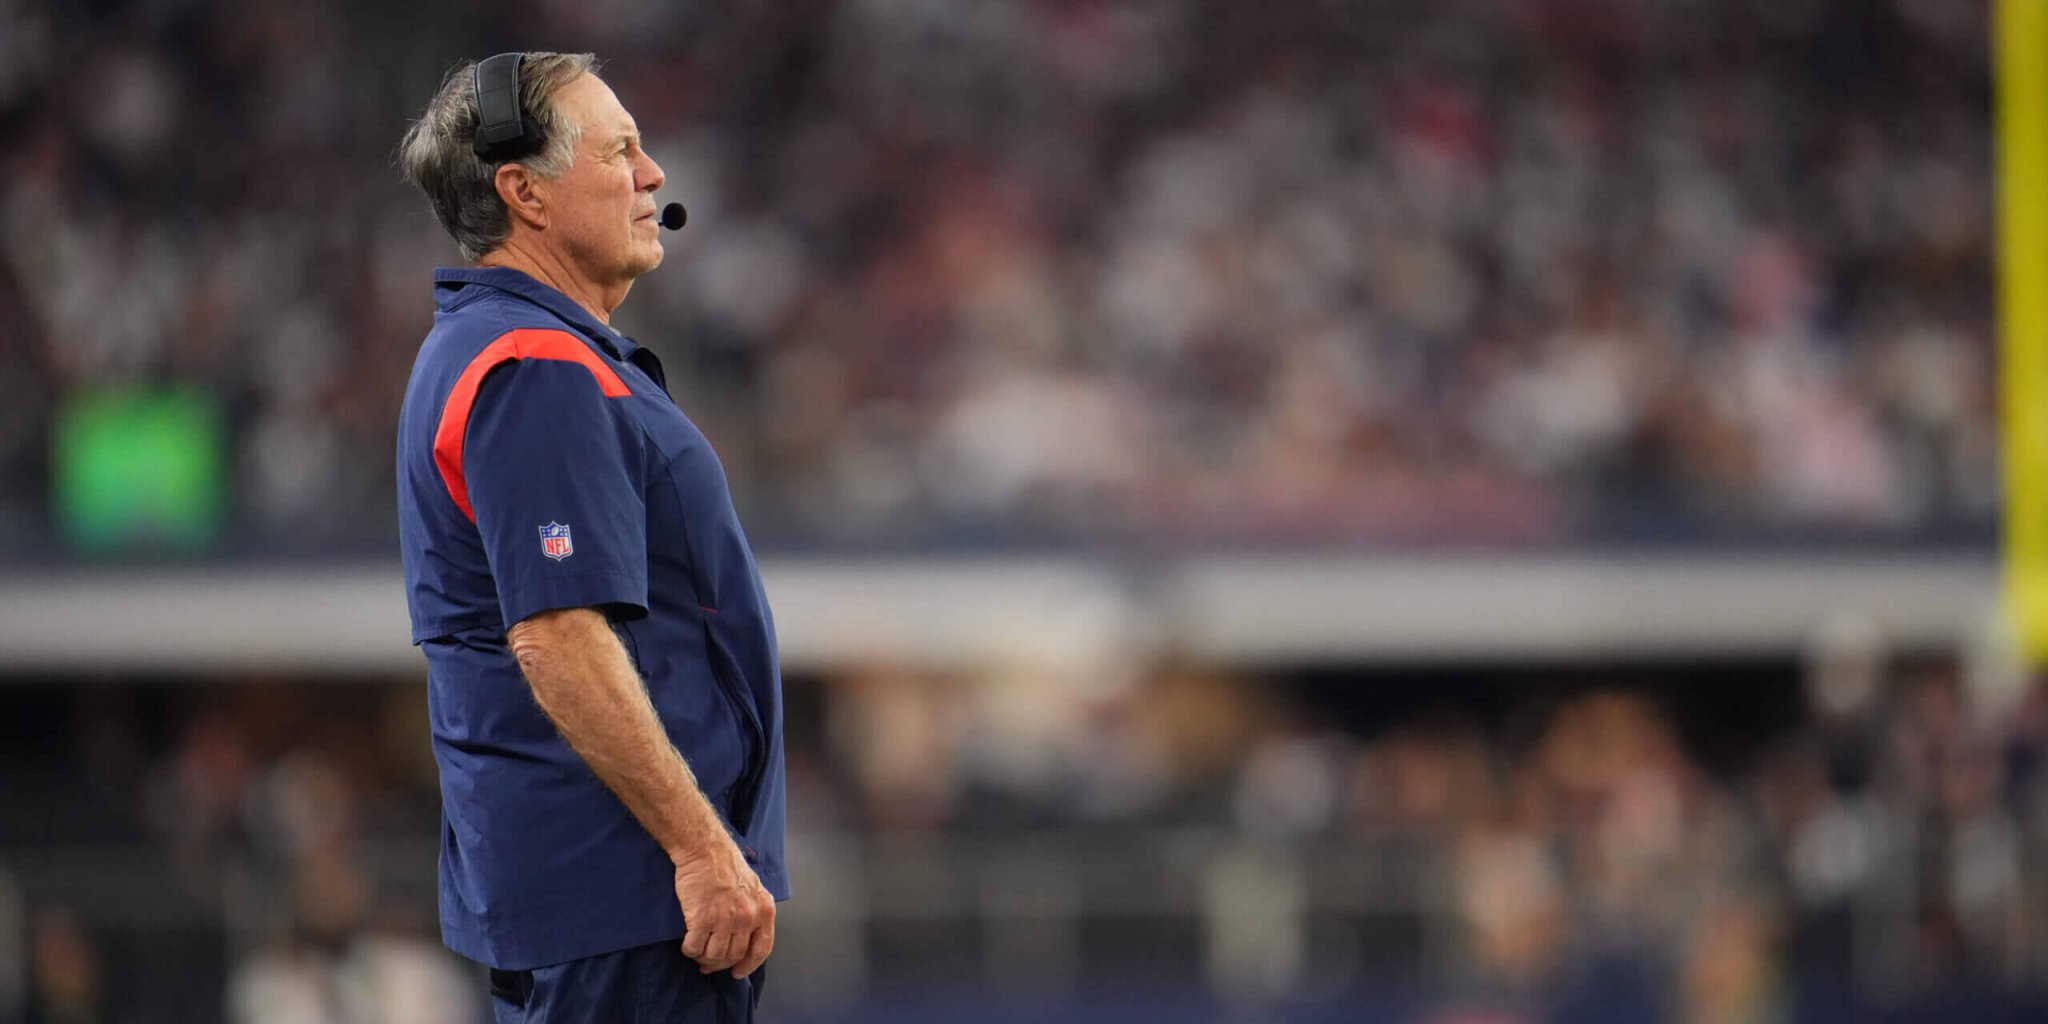 Fire Bill Belichick or retain him? What if Patriots had another option? Let’s talk trades